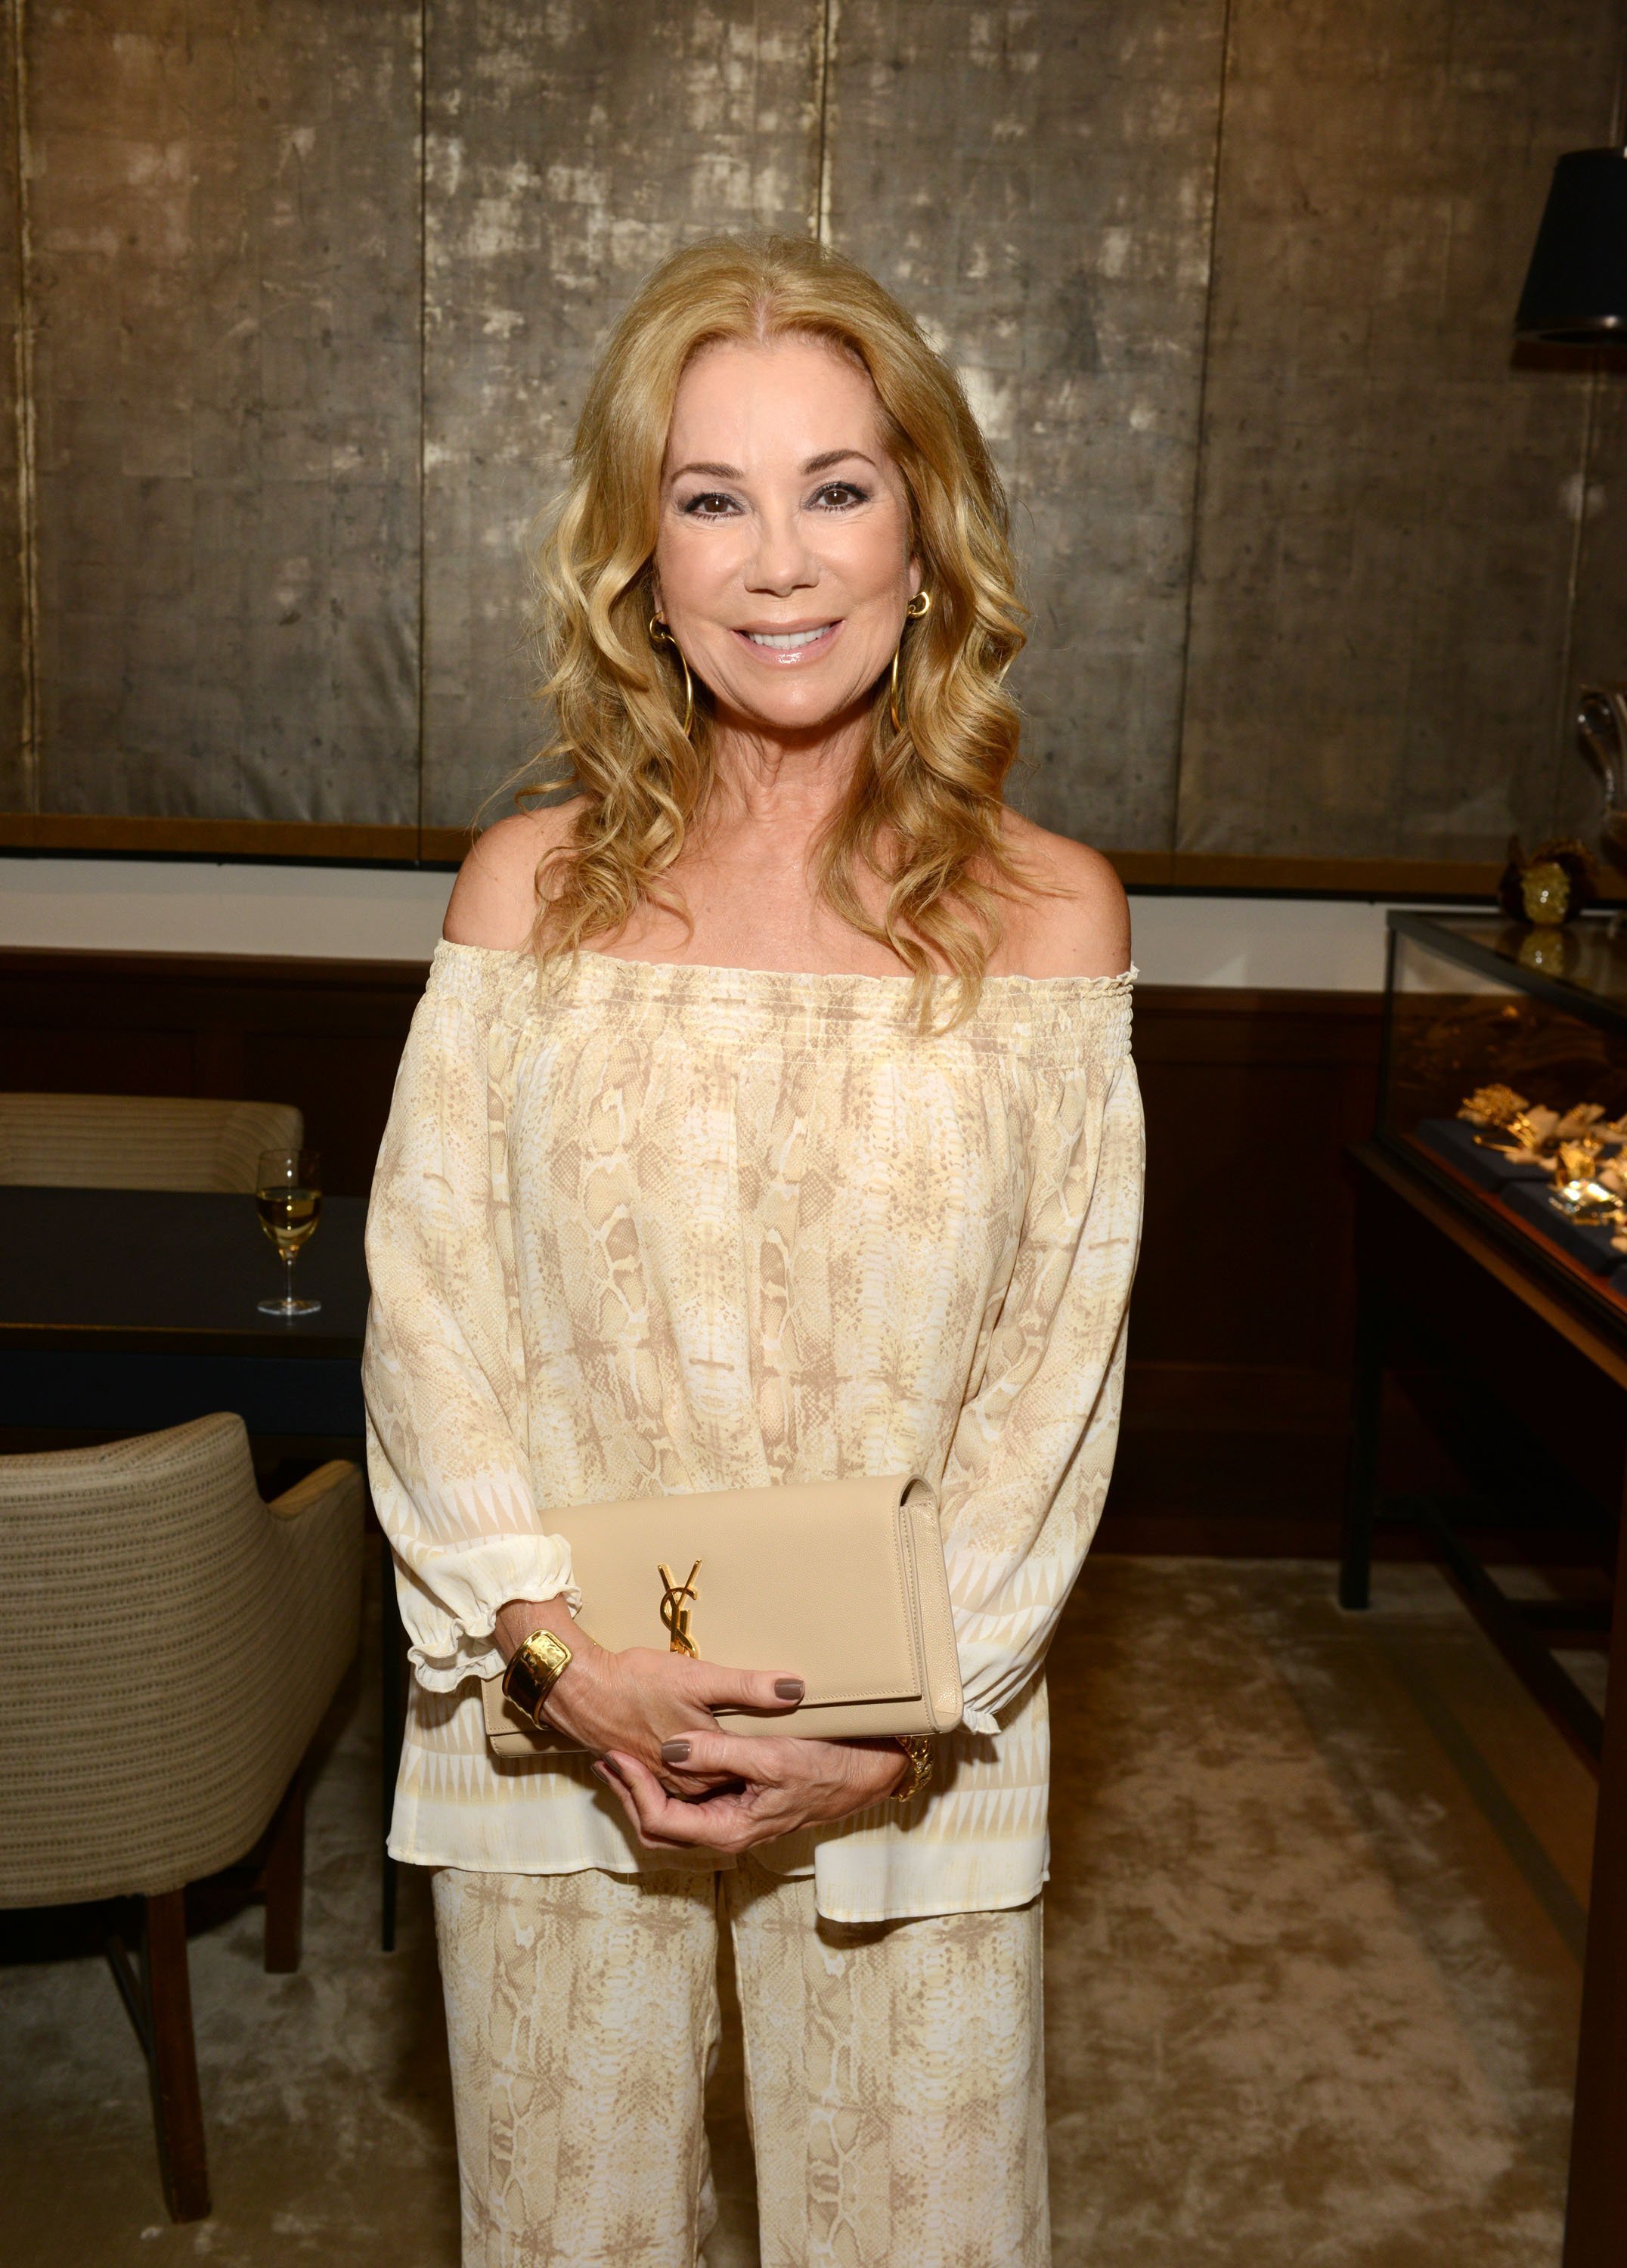 Kathie Lee Gifford on June 10, 2016 at Betteridge in Greenwich, Connecticut | Source: Getty Images